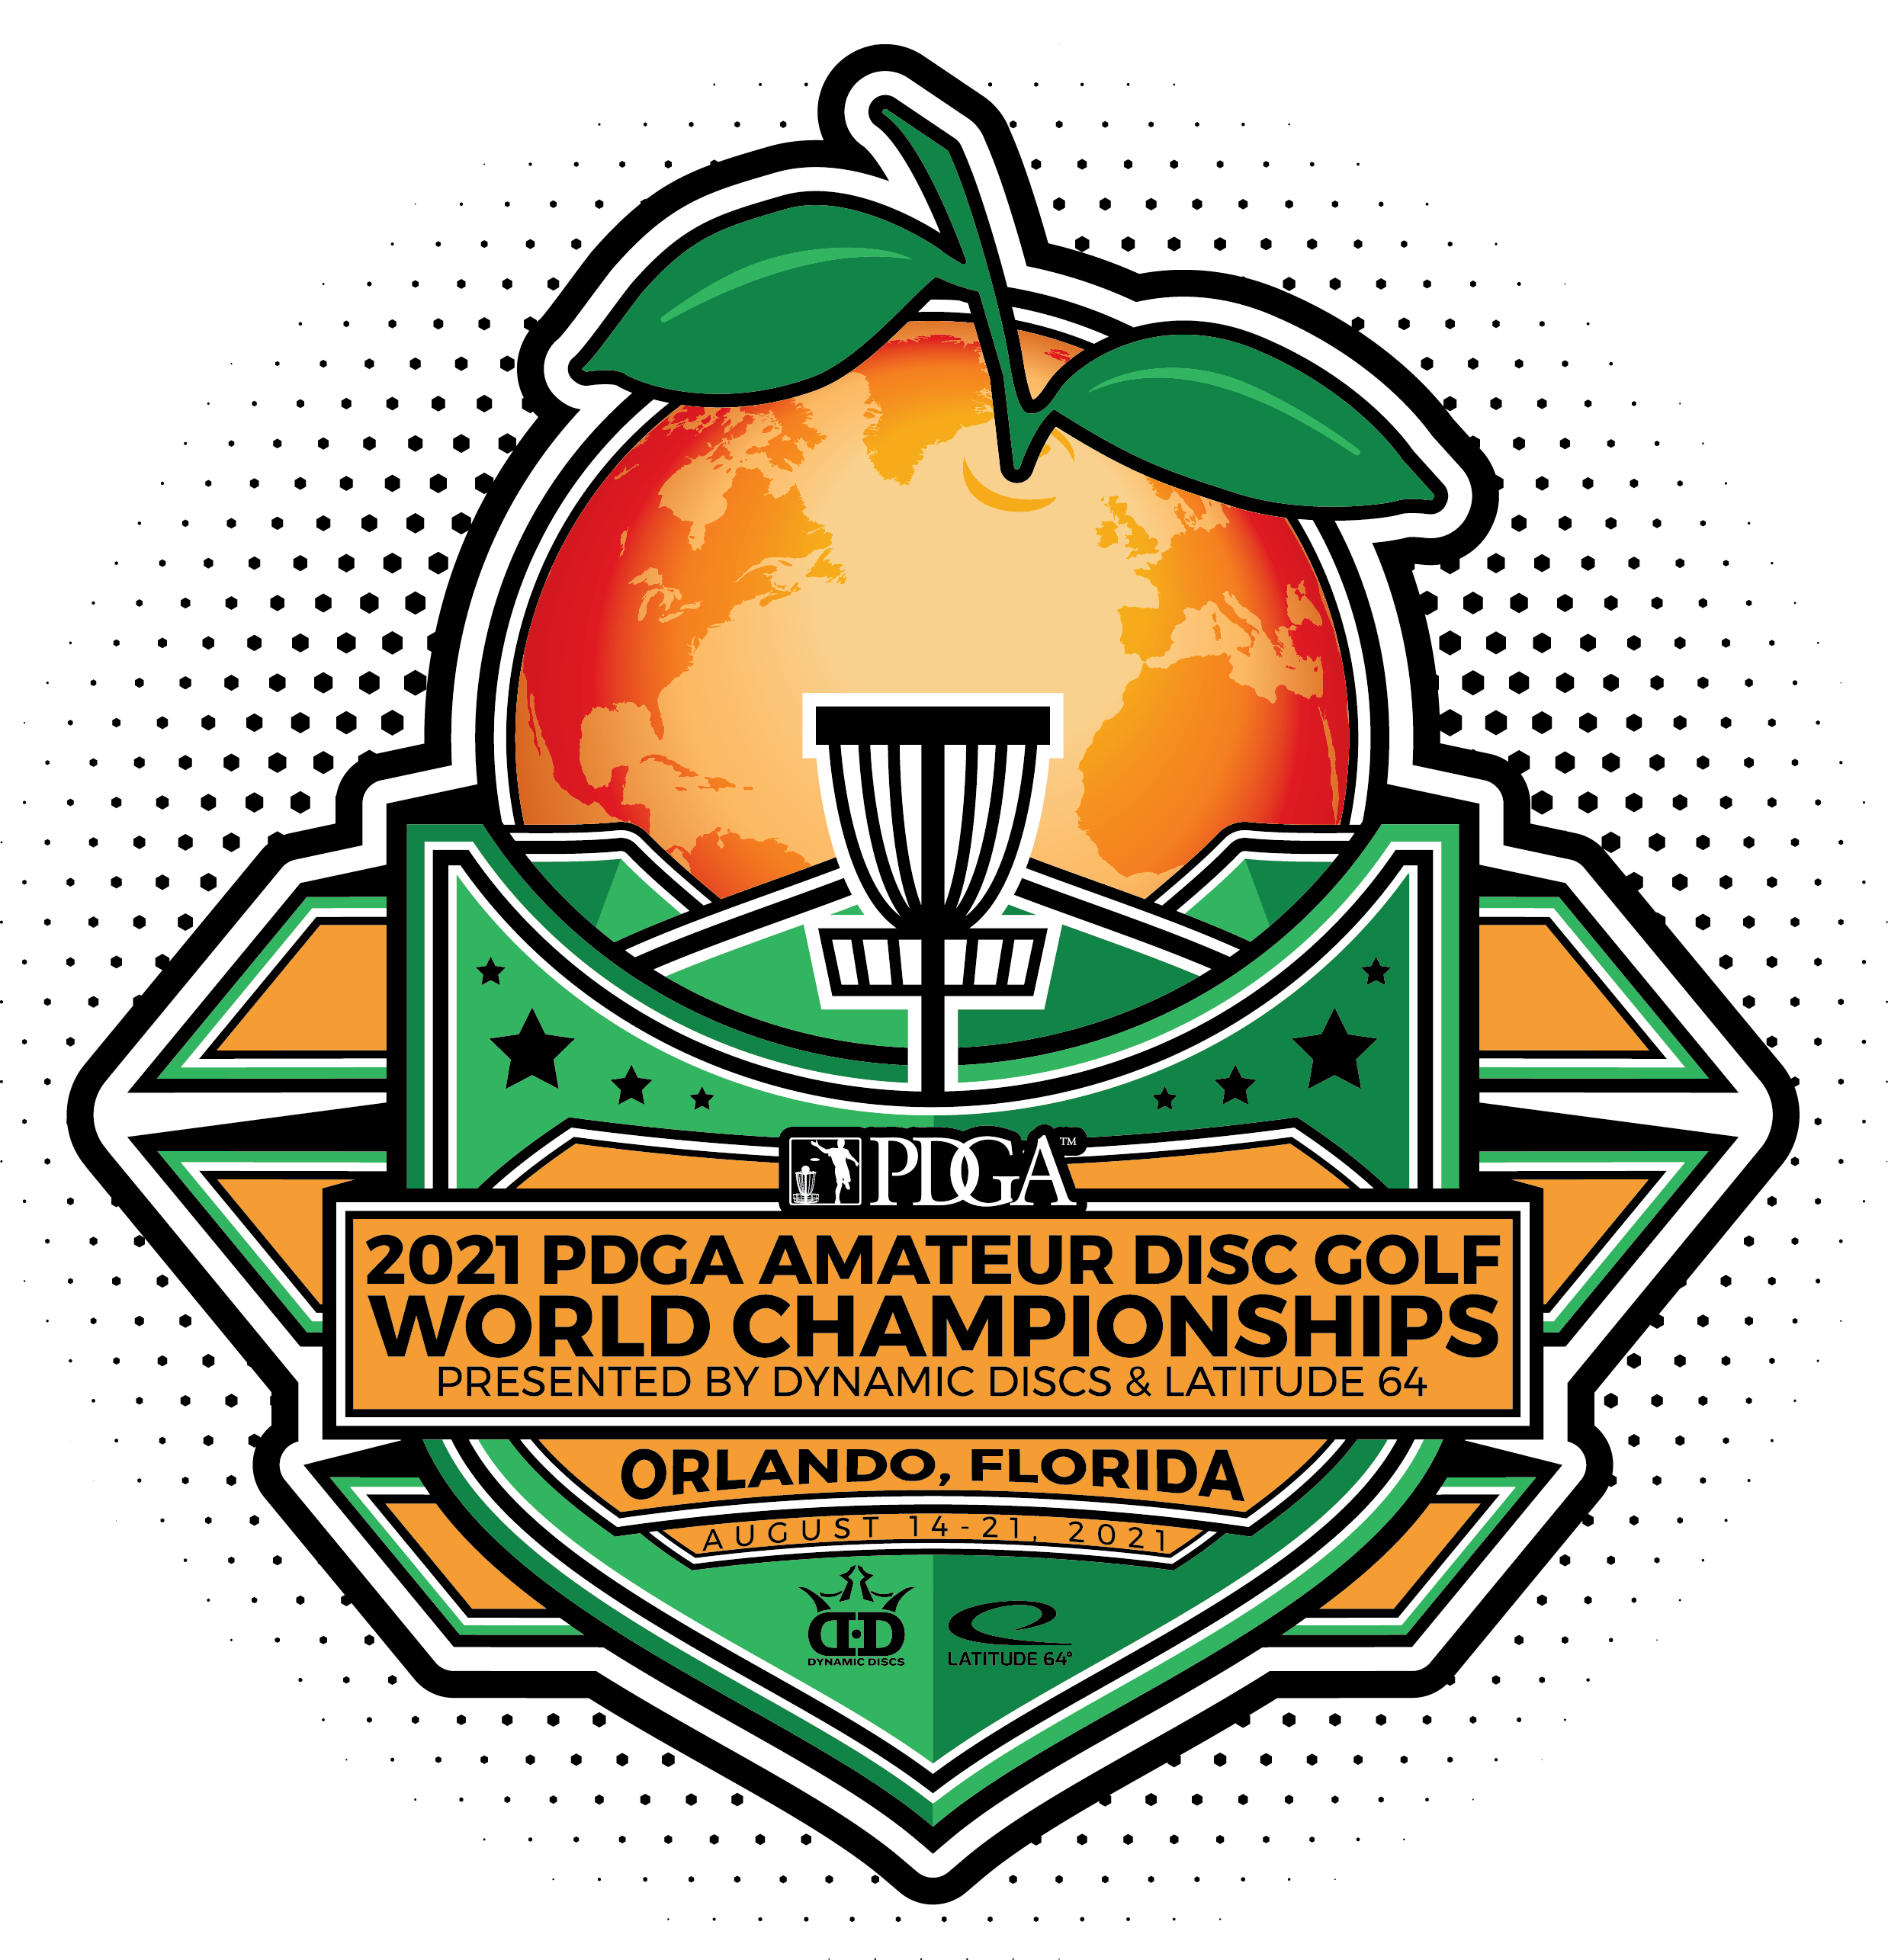 2021 PDGA Amateur Disc Golf World Championships presented by Dynamic Discs and Latitude 64 Professional Disc Golf Association